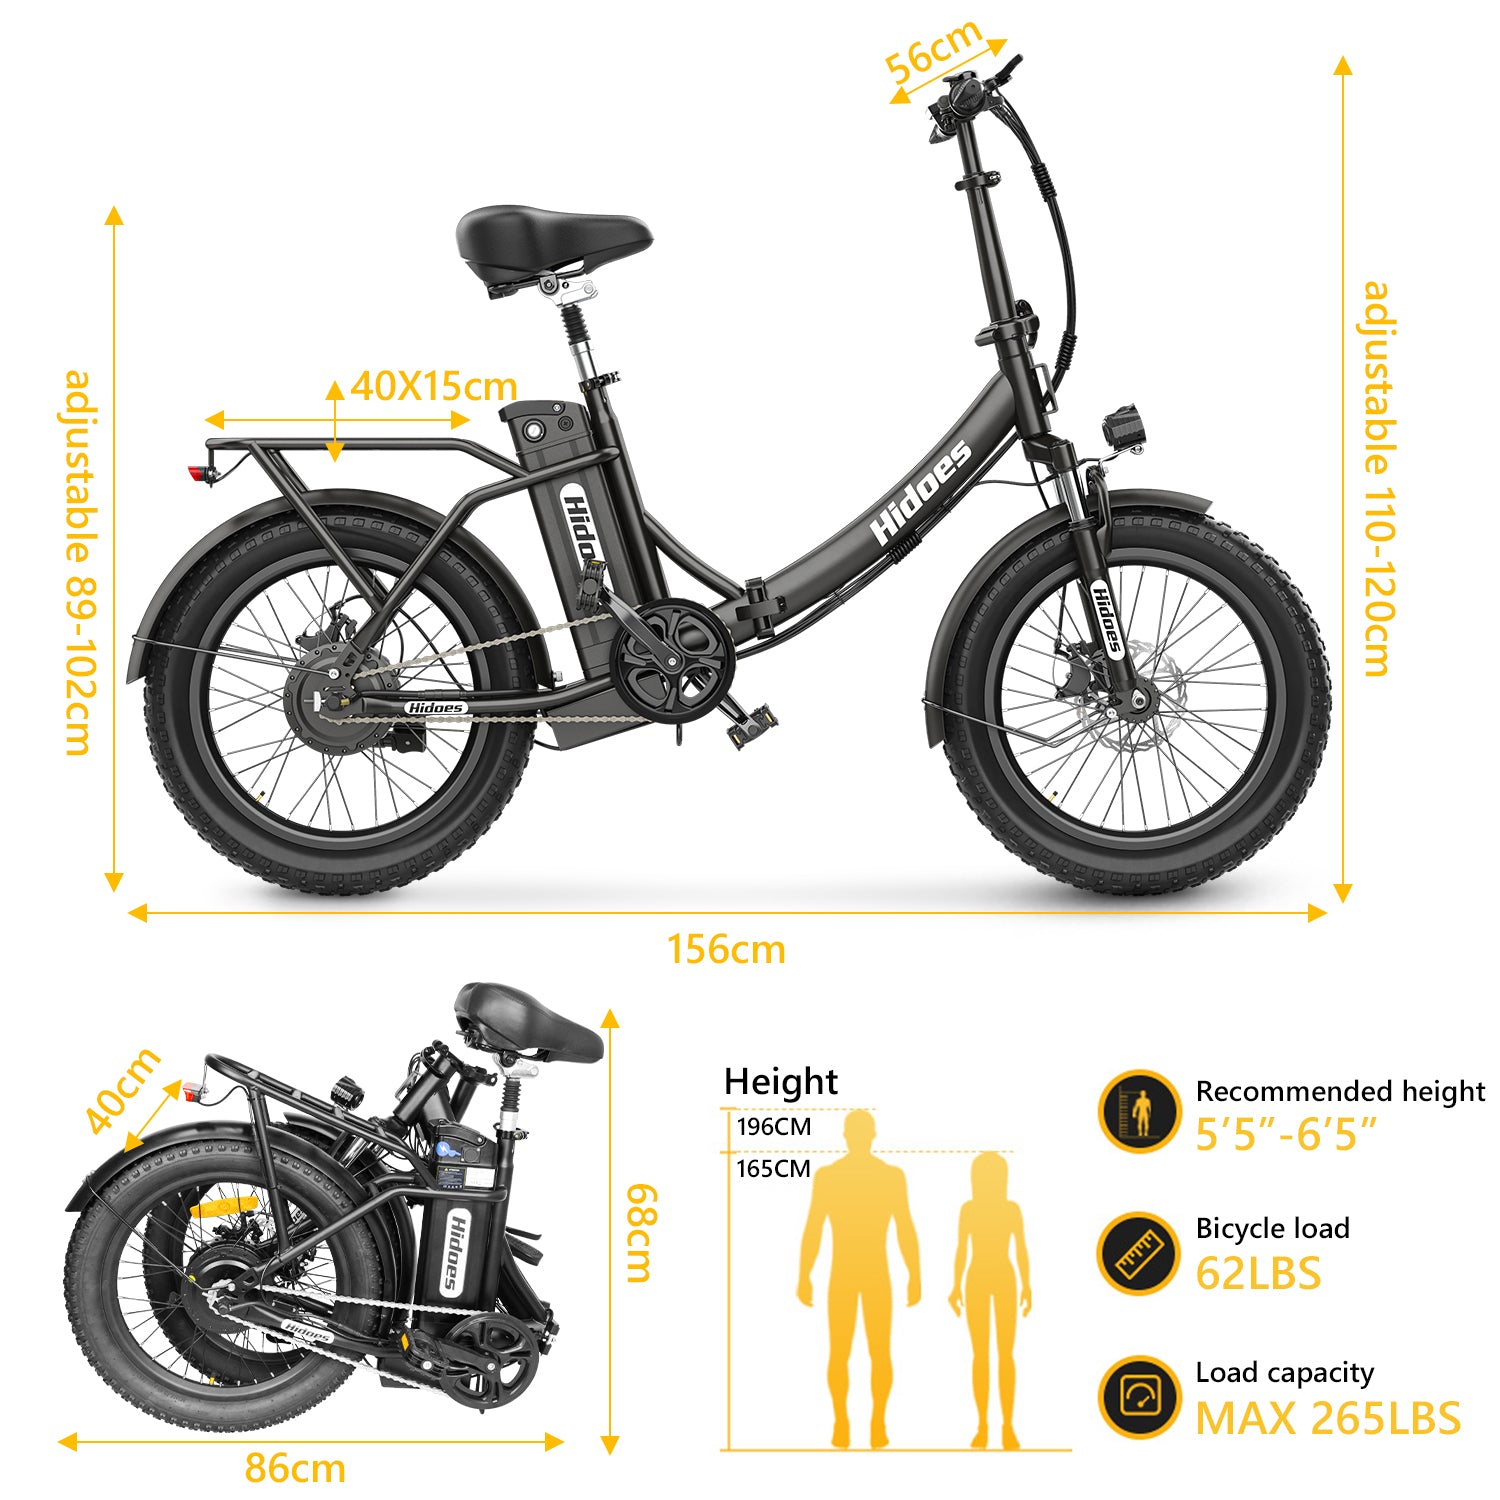 Hidoes C2 Folding electric bike for commuting recommend size